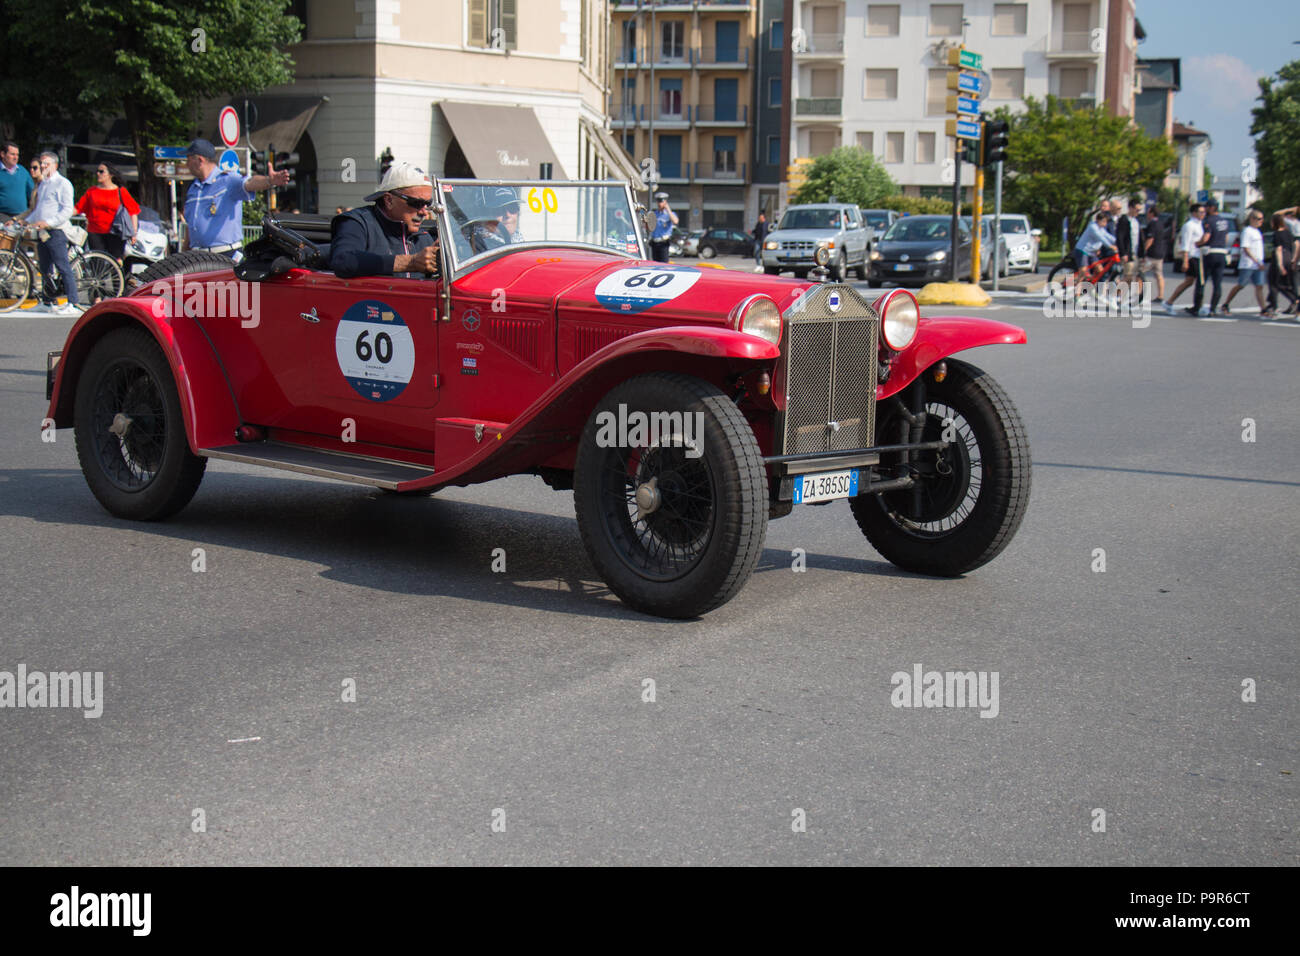 Lancia Lambda High Resolution Stock Photography and Images - Alamy